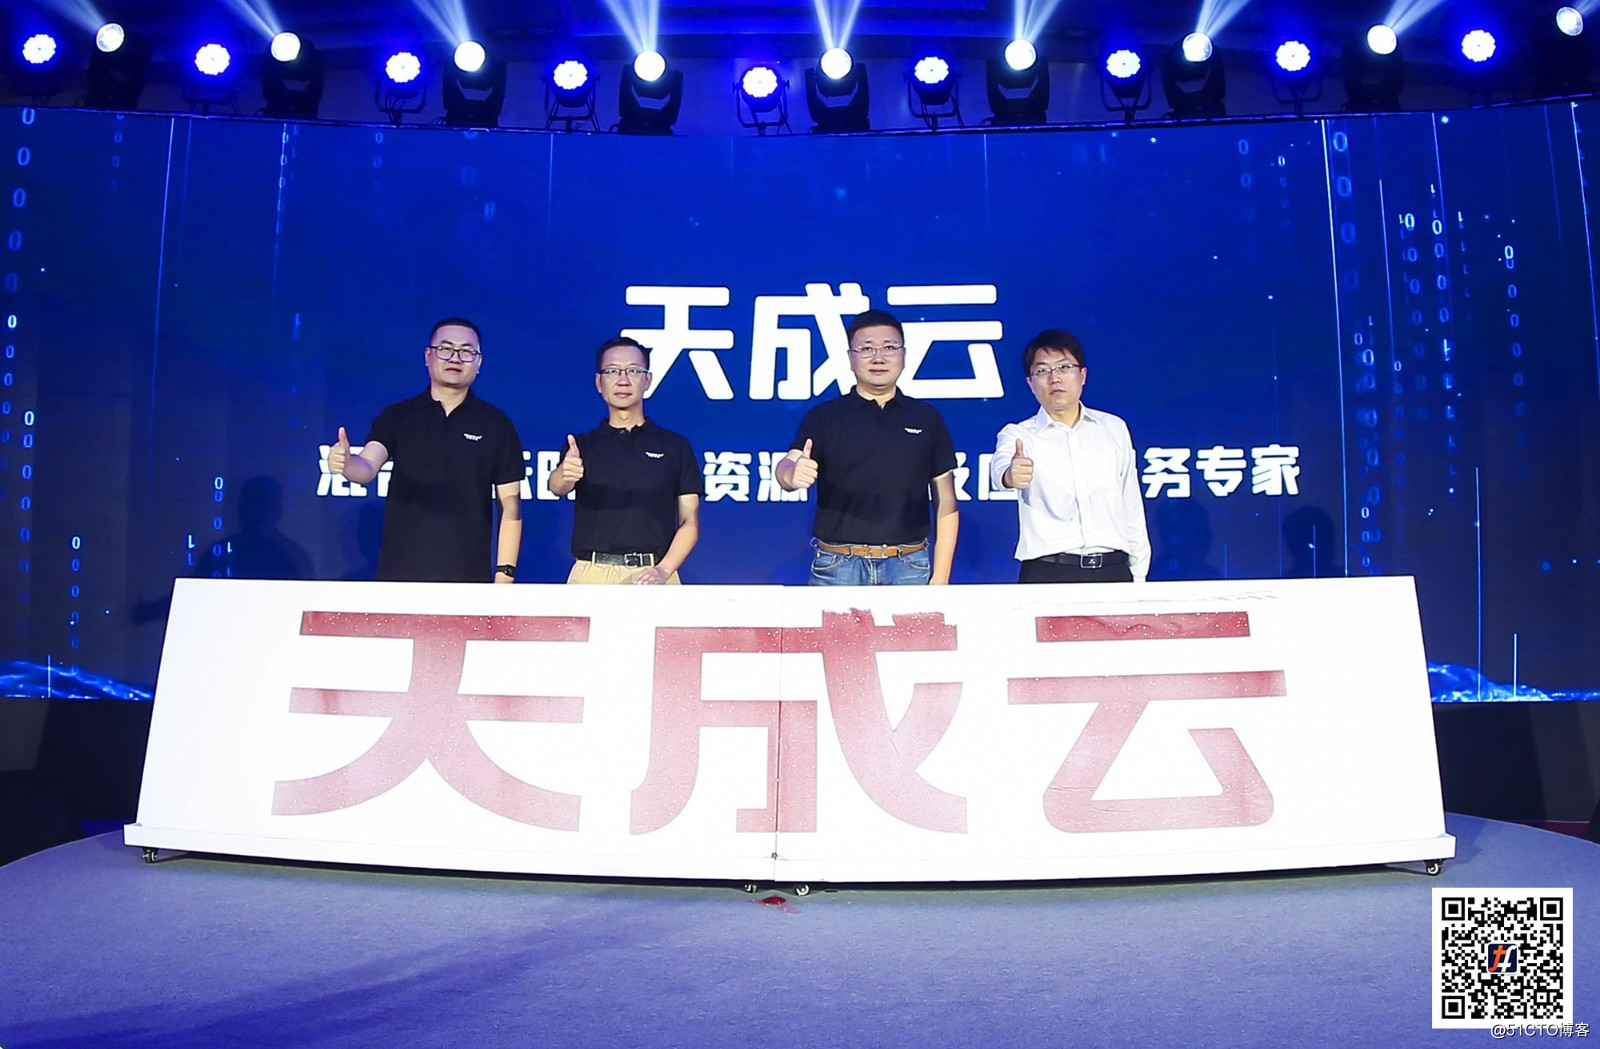 "Tiancheng Cloud" brand release-Tungsten Fabric helps open source and open ecological development